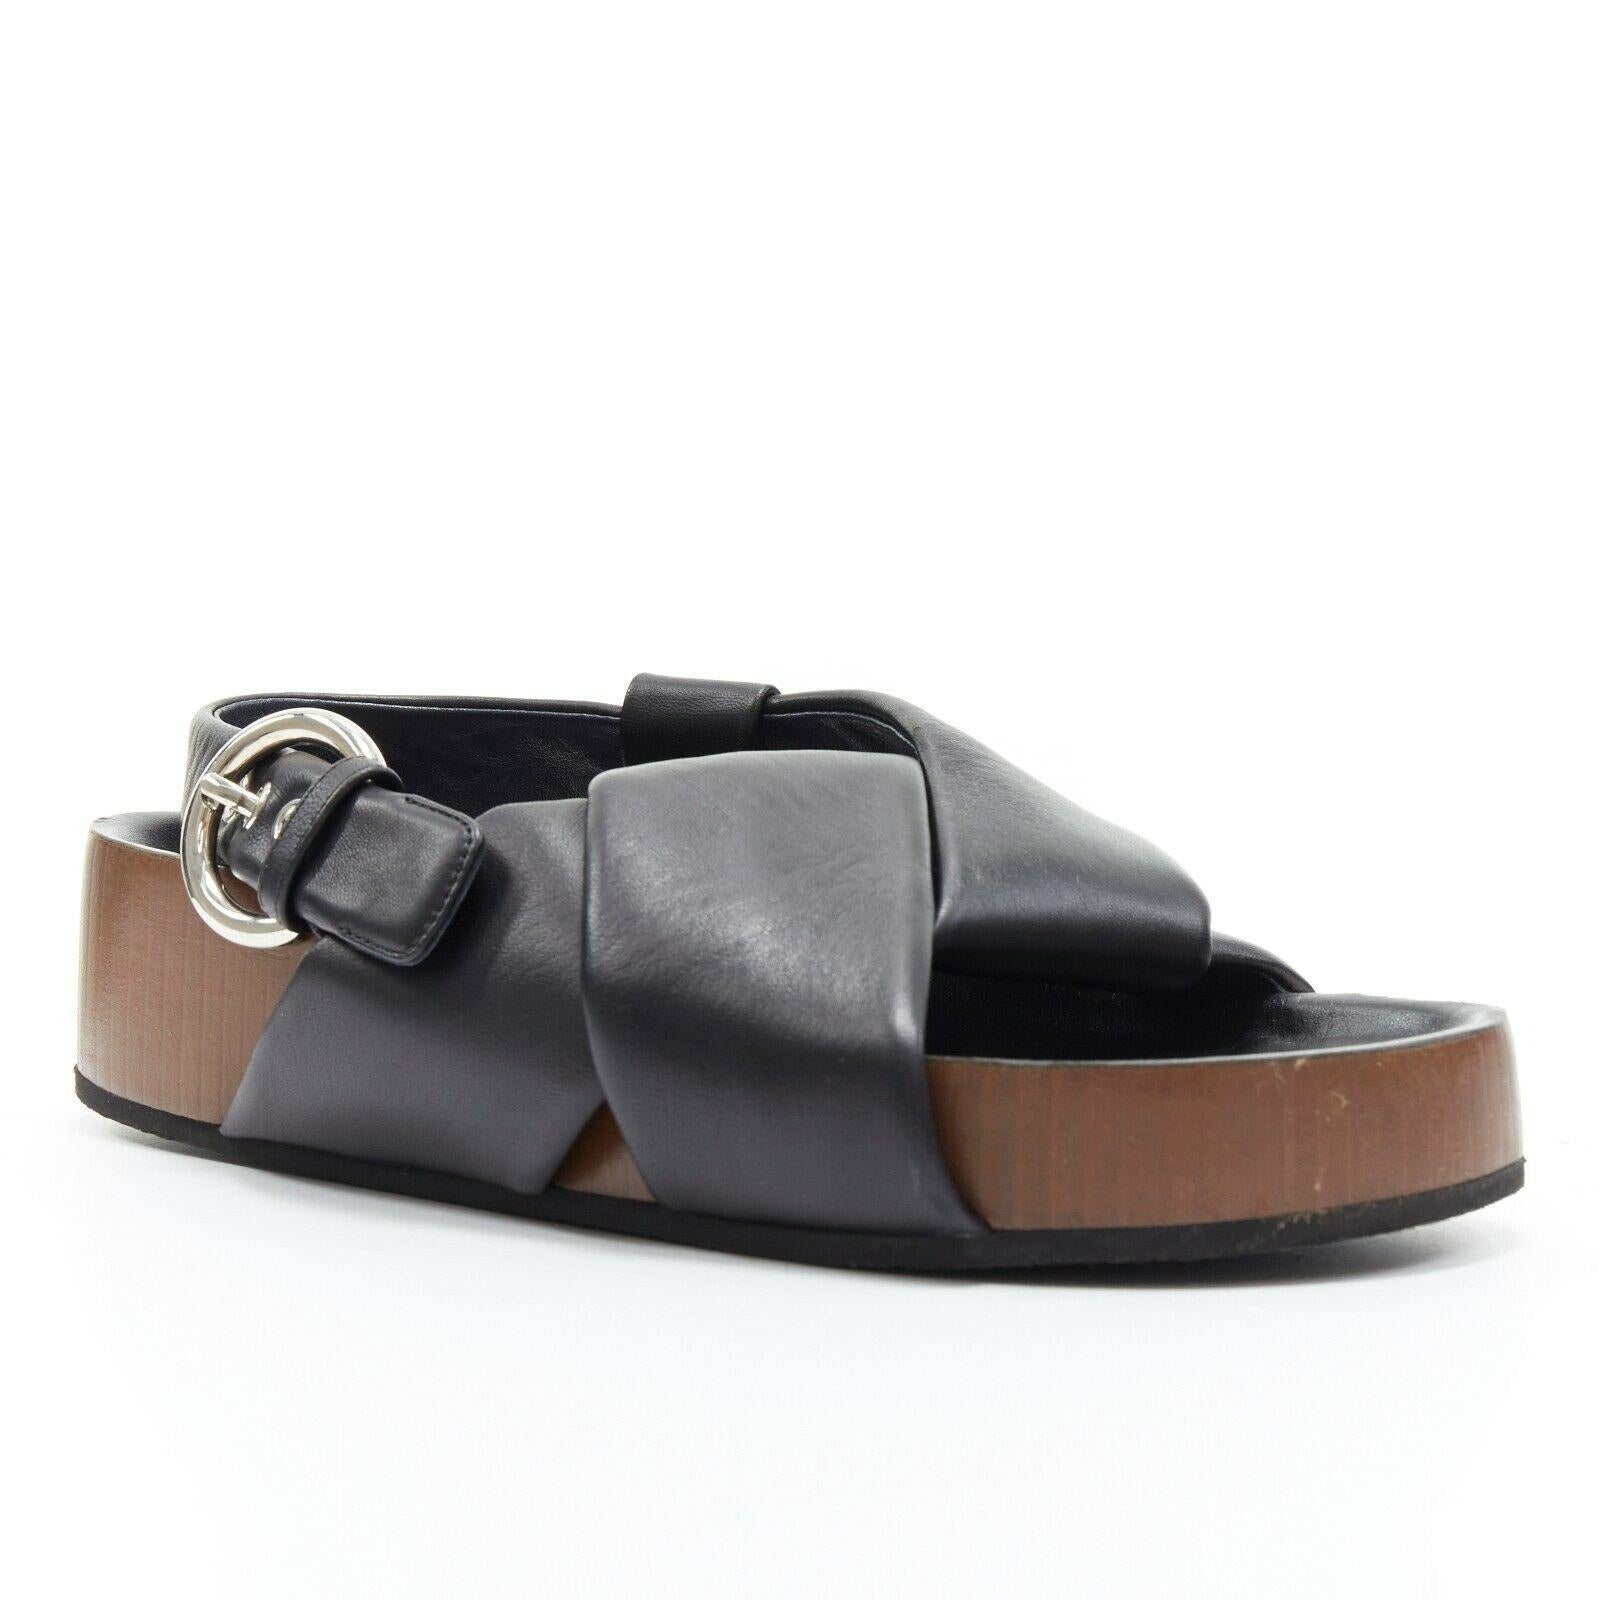 CELINE PHOEBE PHILO black padded leather twist slides slingback sandals EU38

CELINE BY PHOEBE PHILO
Black padded leather. Origami twist upper strap. Open toe. Dark brown
vertical stripe textured leather sole. Leather lining. Moulded footbed. Thick